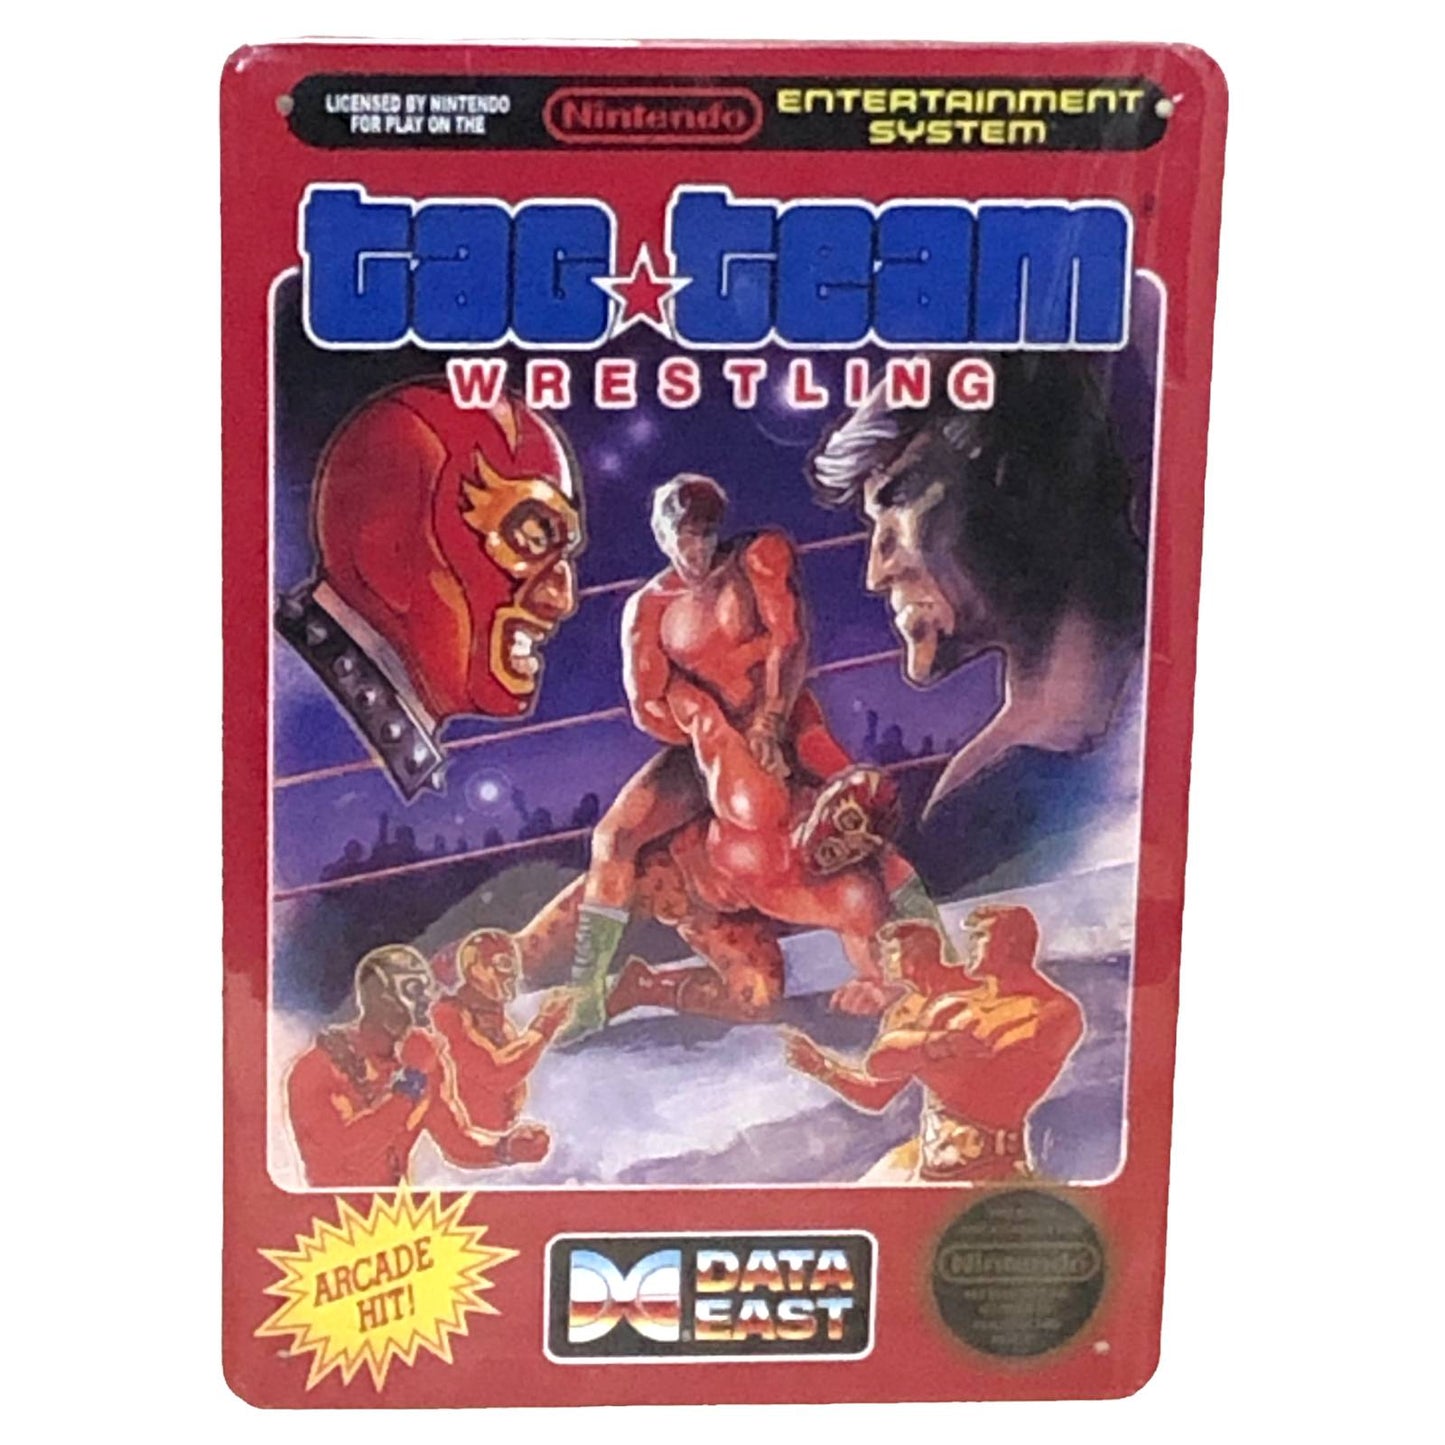 Tae Team Wrestling Video Game Cover Metal Tin Sign 8"x12"